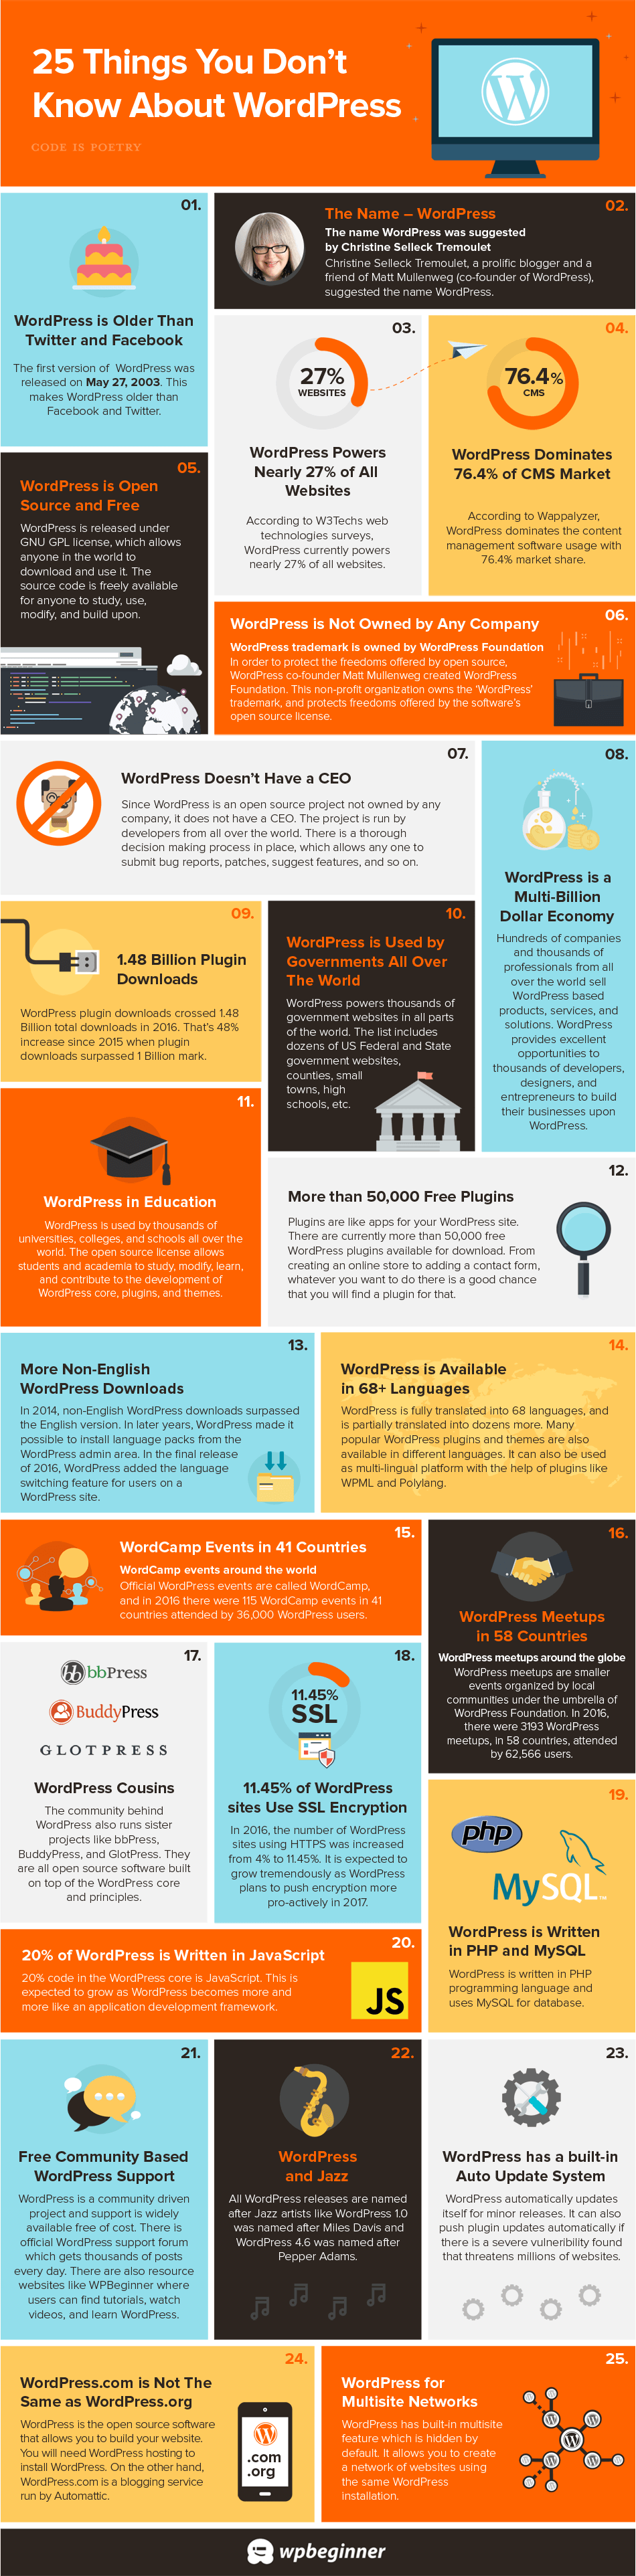 facts-about-wordpress-infographic-1.png